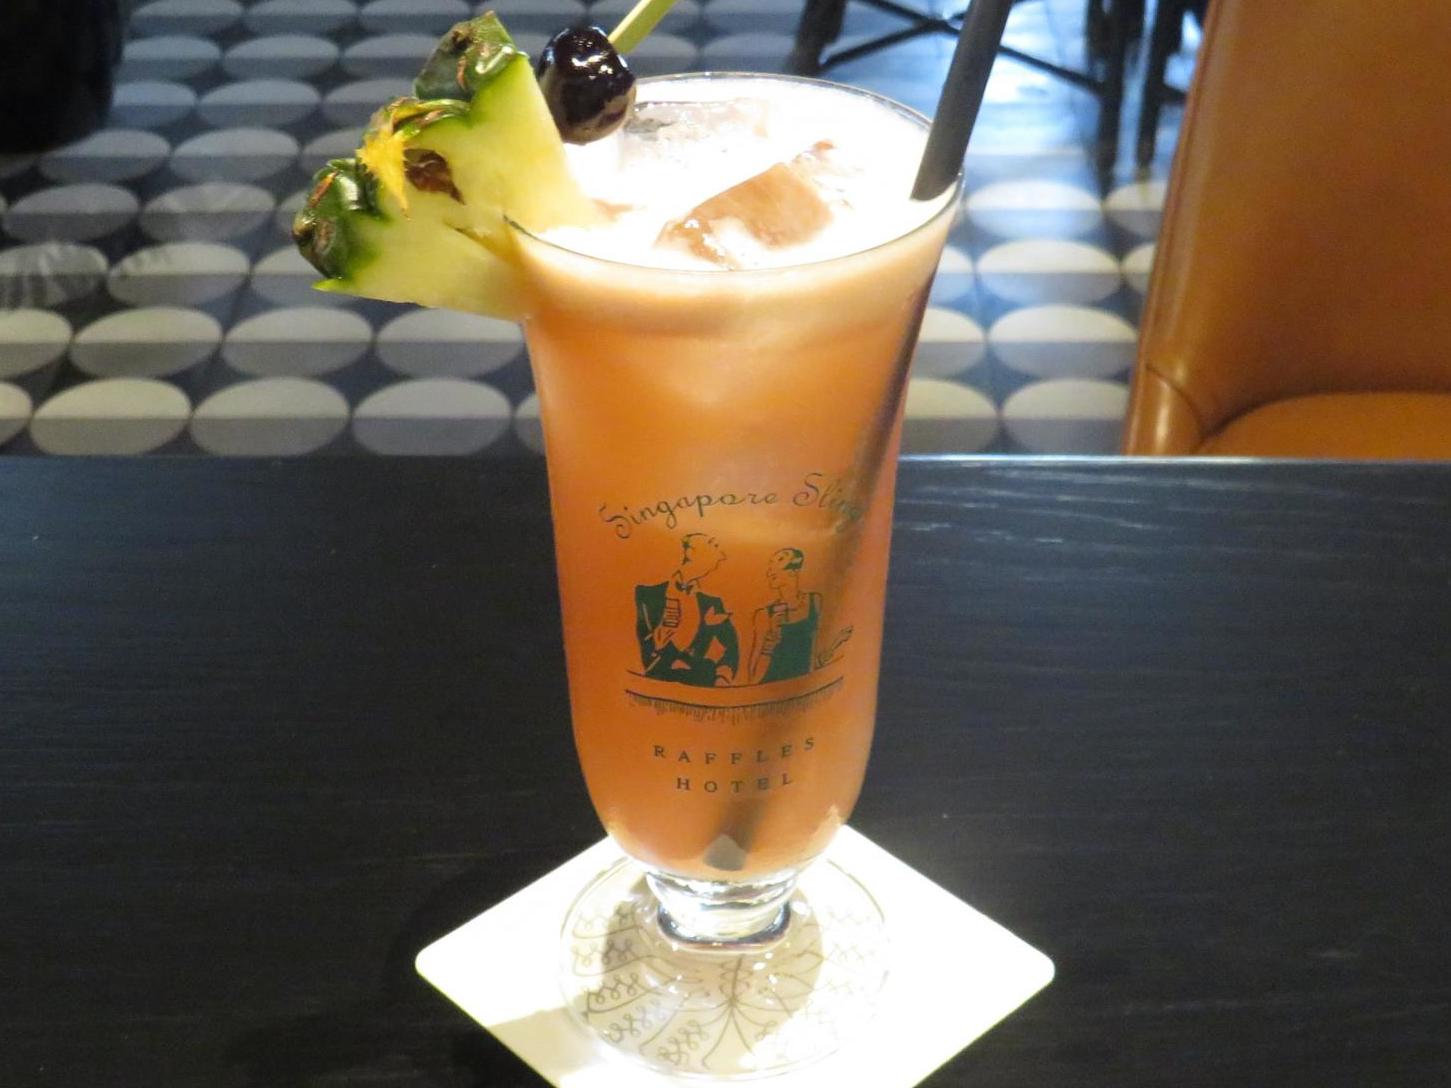 A Singapore Sling at the Raffles Long Bar is a quintessential Singapore experience